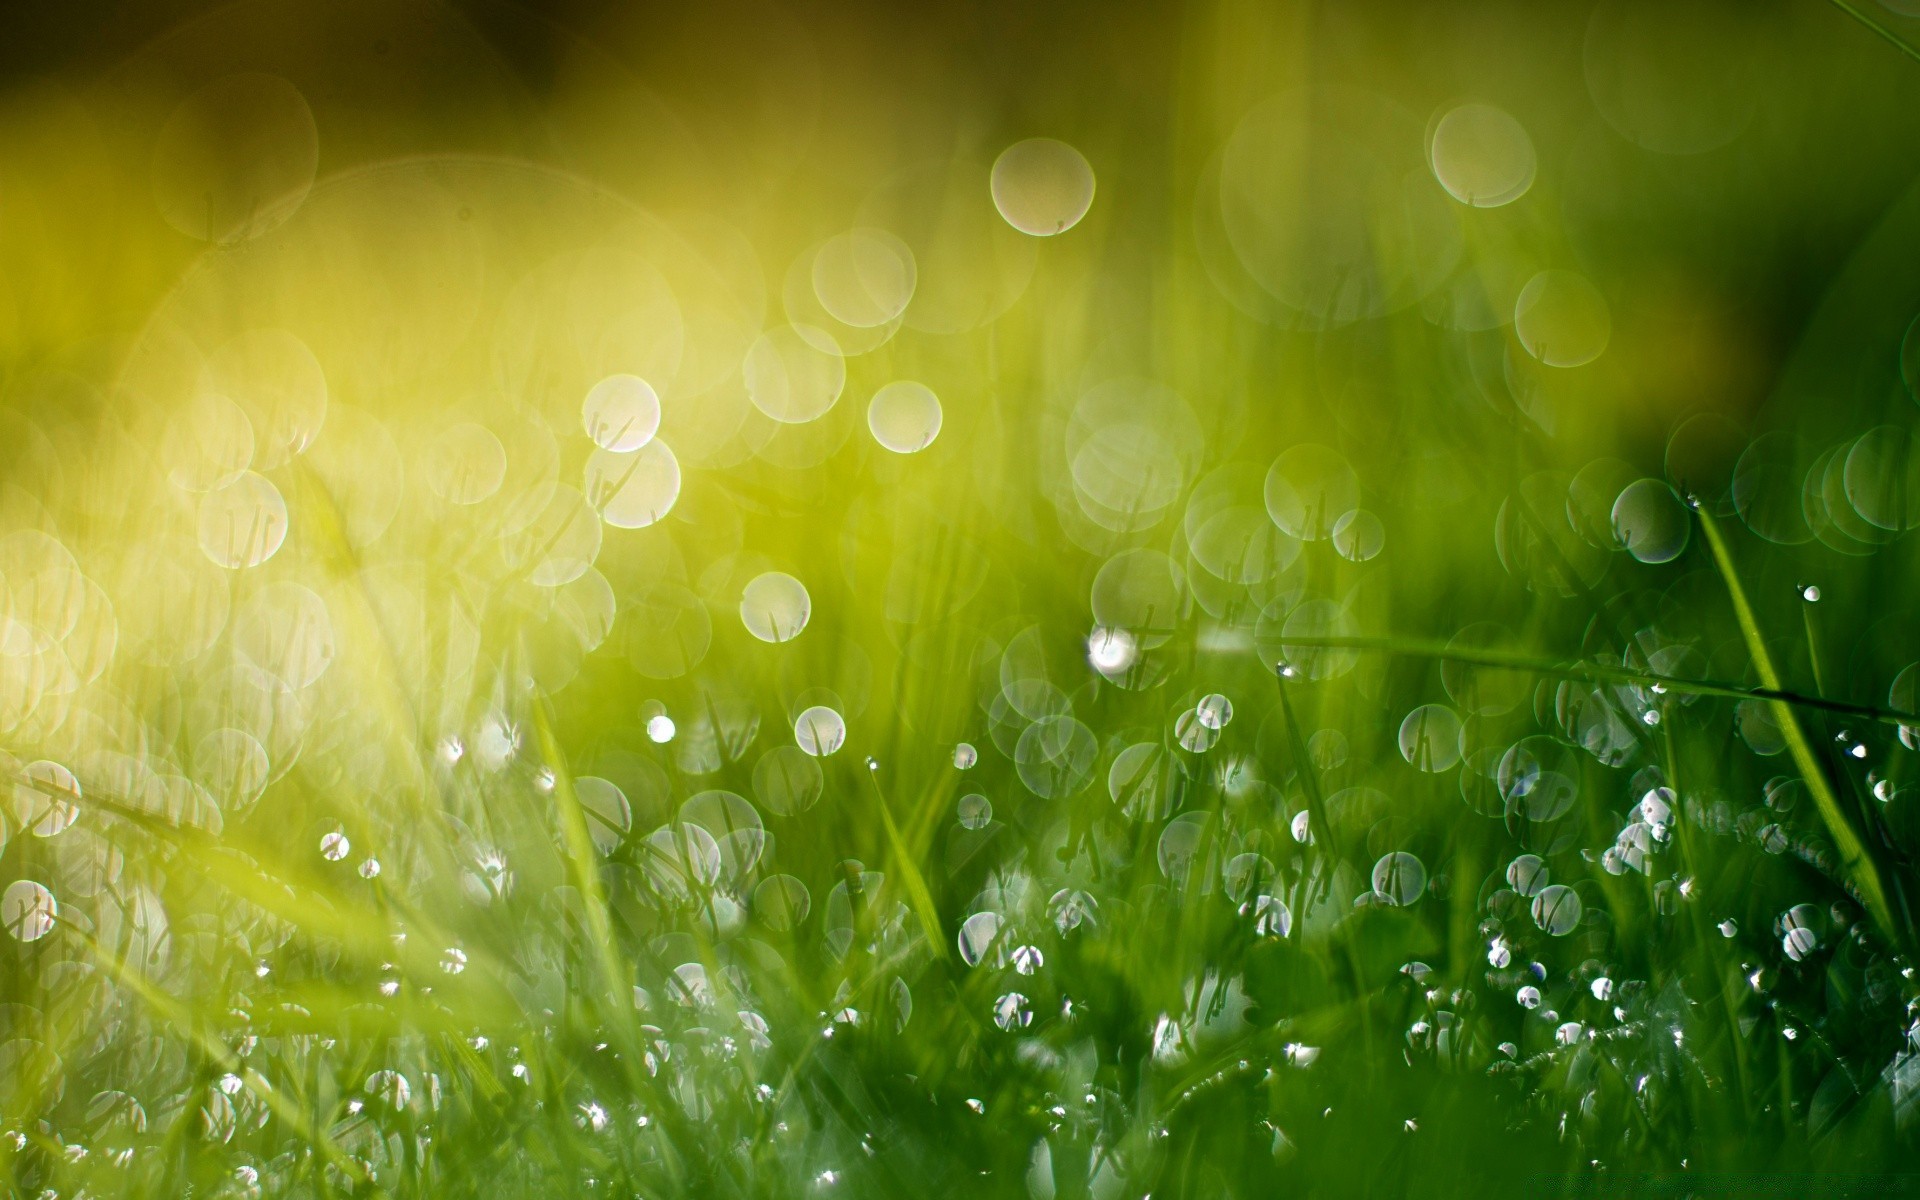 Dew on the bright green grass wallpaper